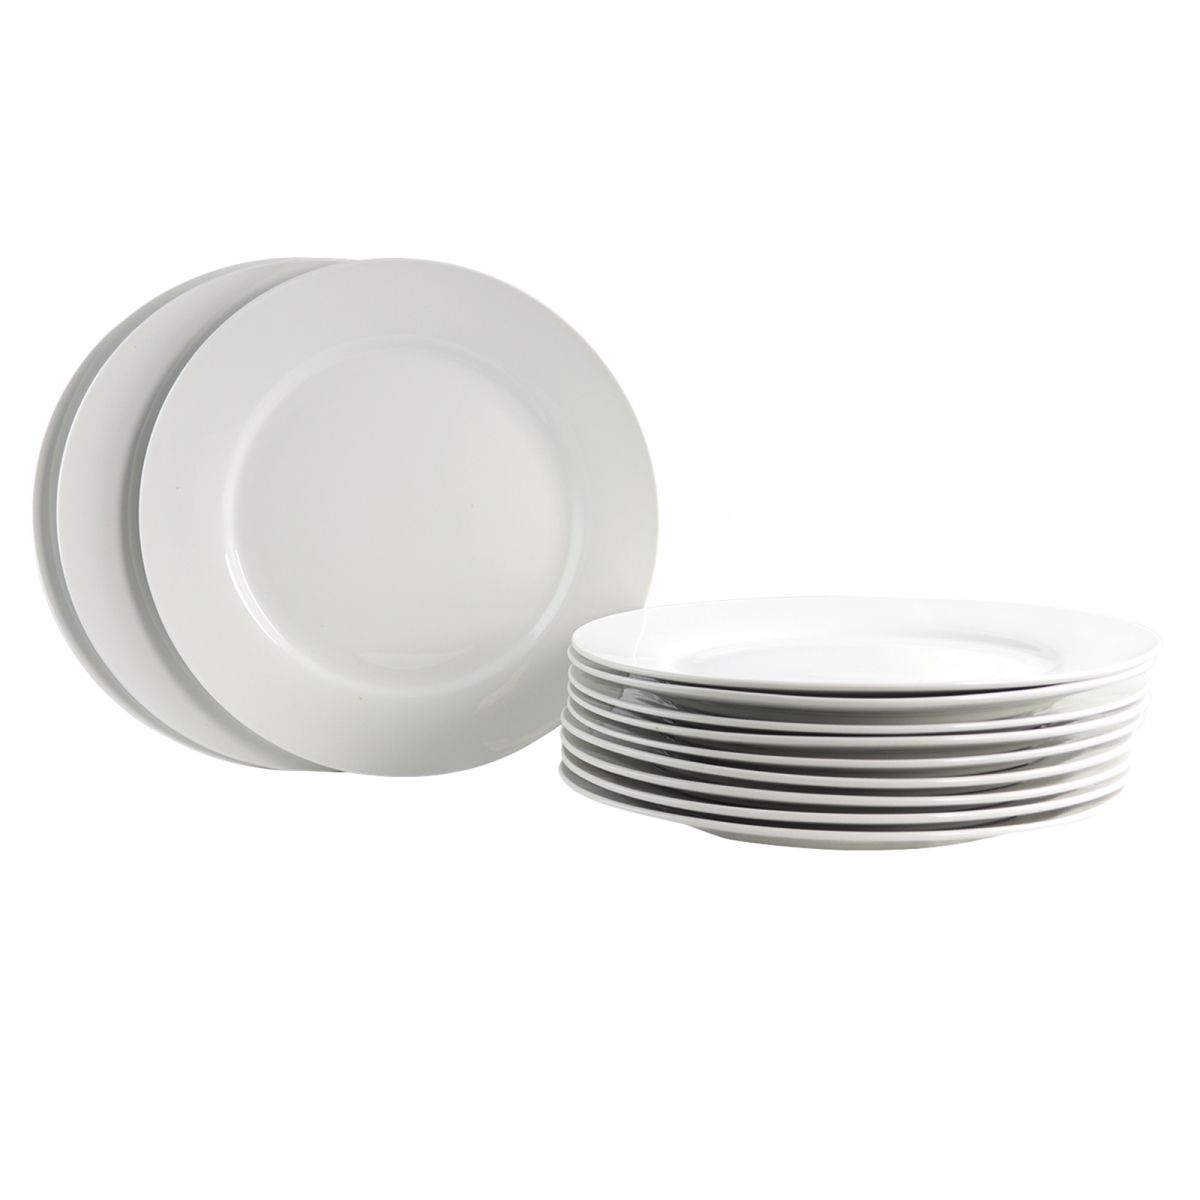 108045.01 12 Piece Noble Court Dinner Plate Set, White